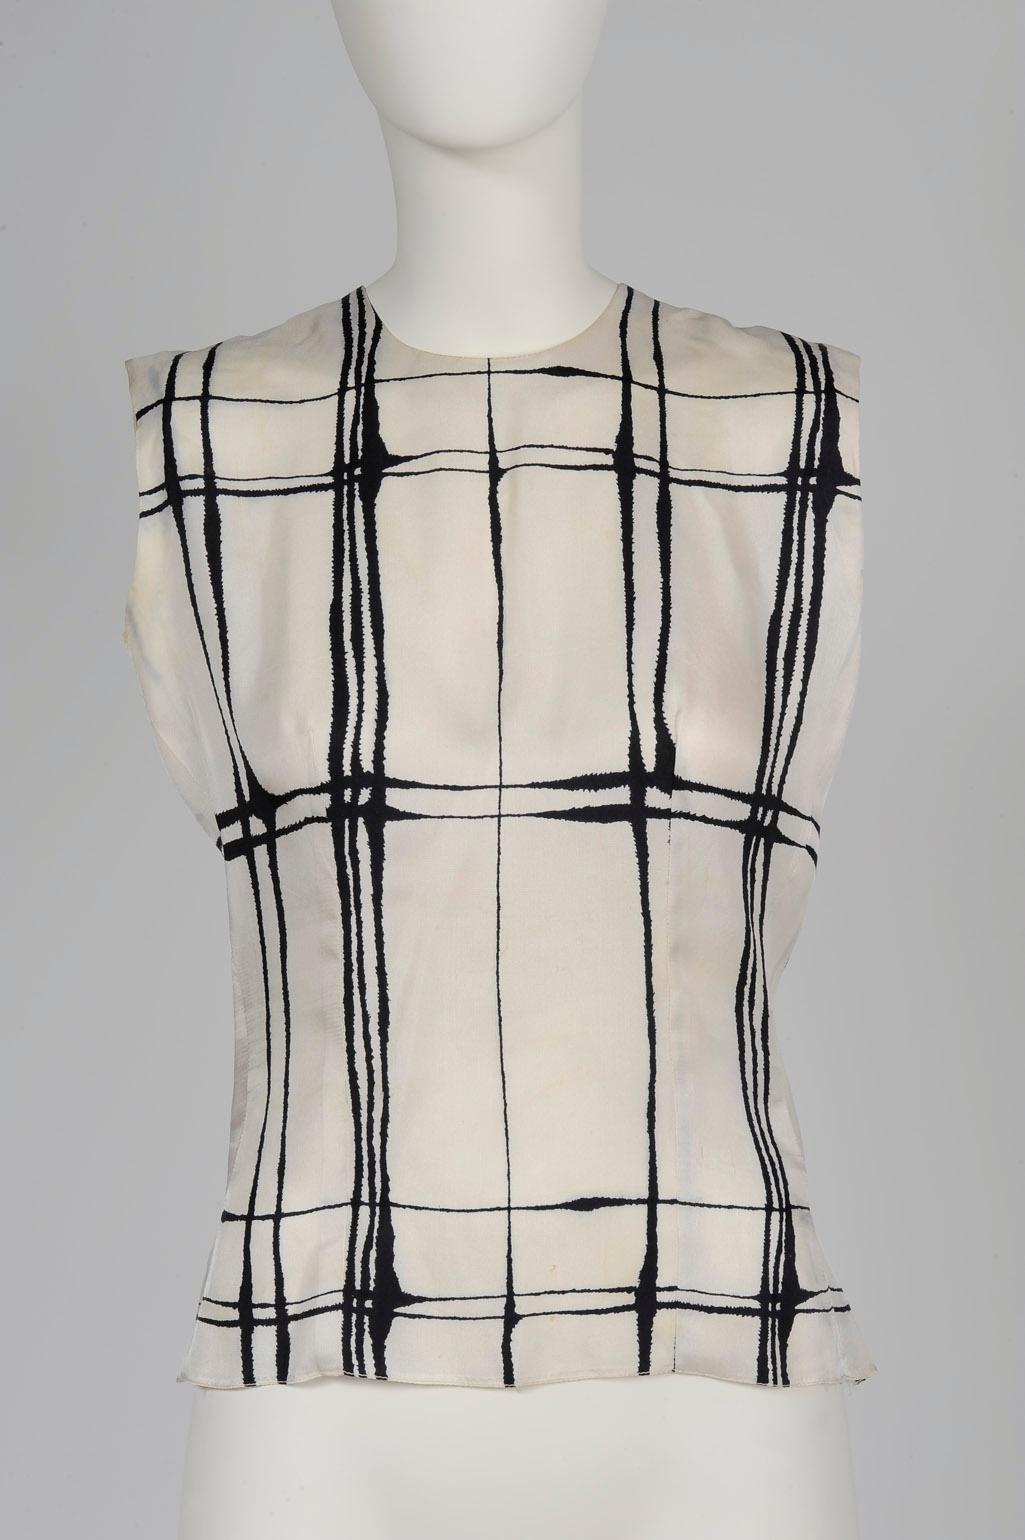 Documented Chanel by Coco Chanel Haute Couture Suit Jacket, Spring-Summer 1964 For Sale 3